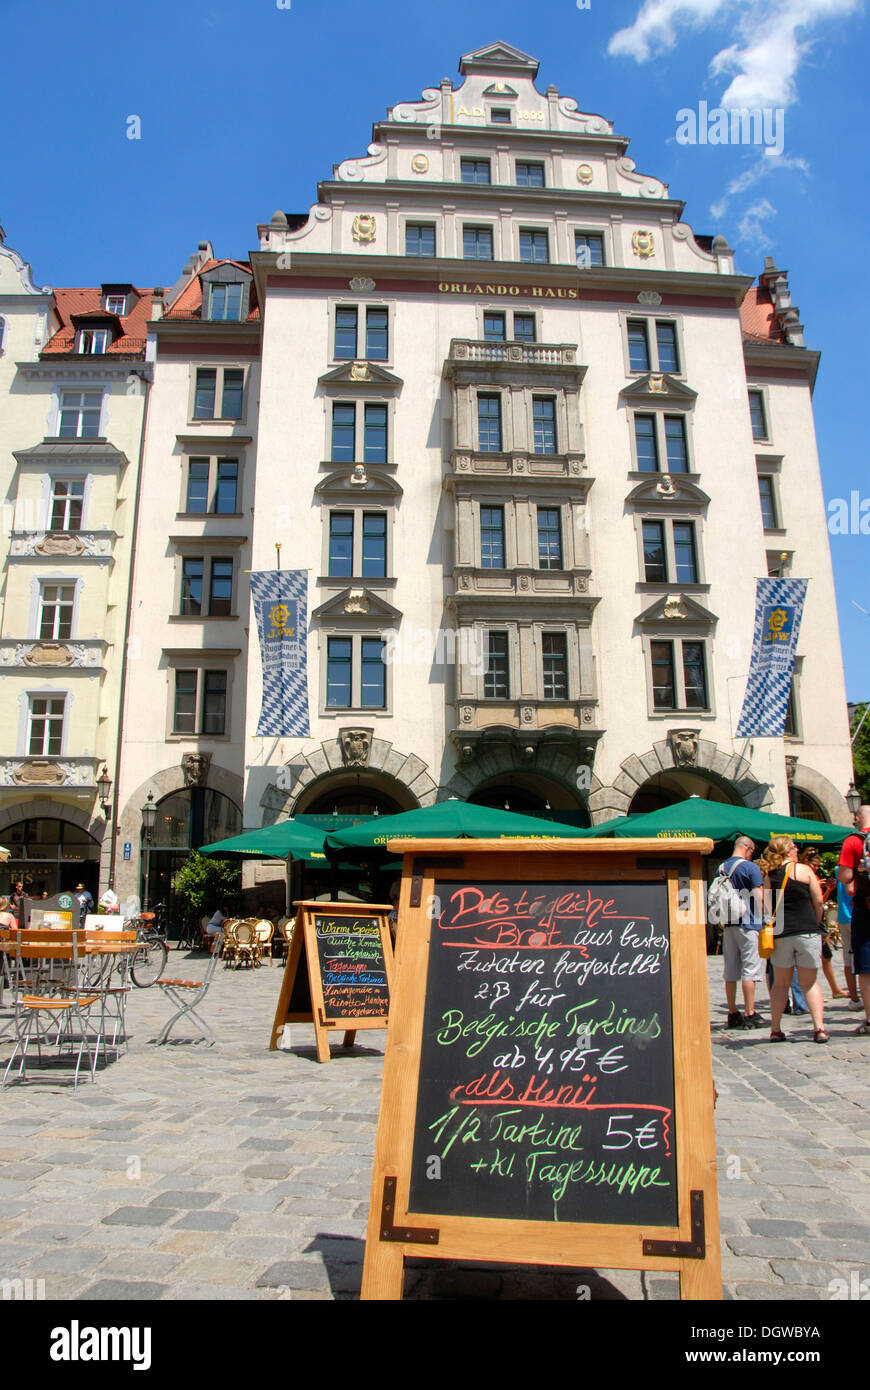 Orlando-Haus building on the Platzl, square with restaurant and menu on blackboard, downtown, old town, Munich, capital Stock Photo